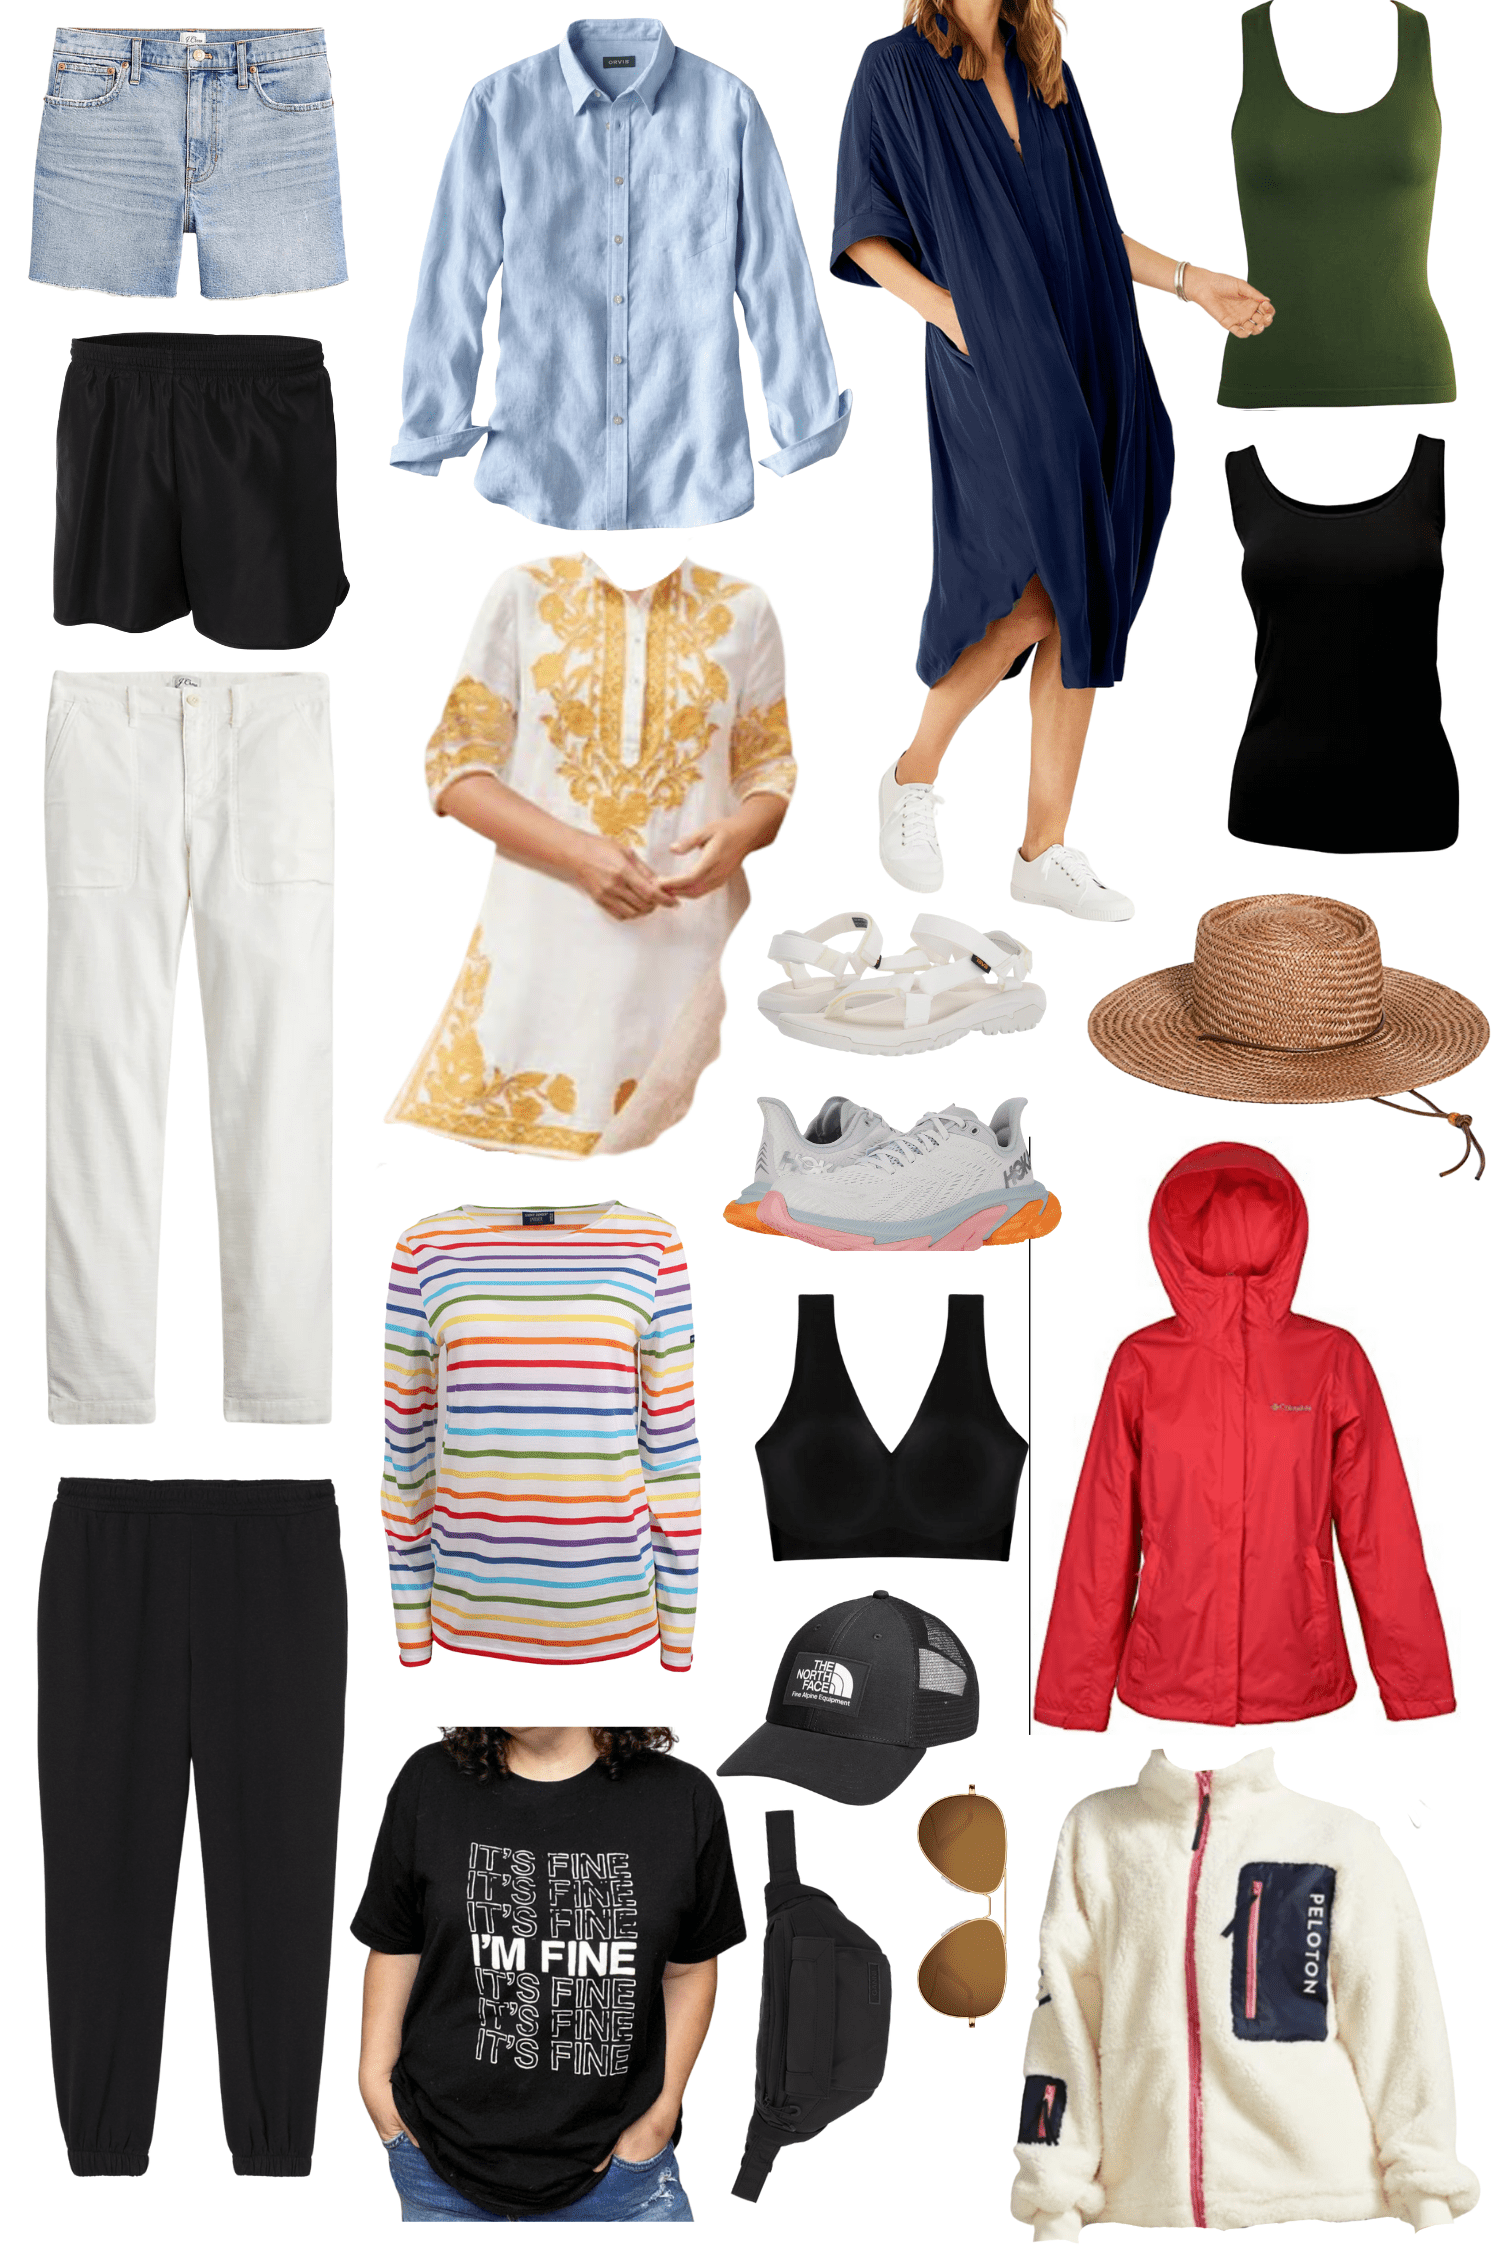 Fire Island Capsule Wardrobe: What I Packed for a Week in August